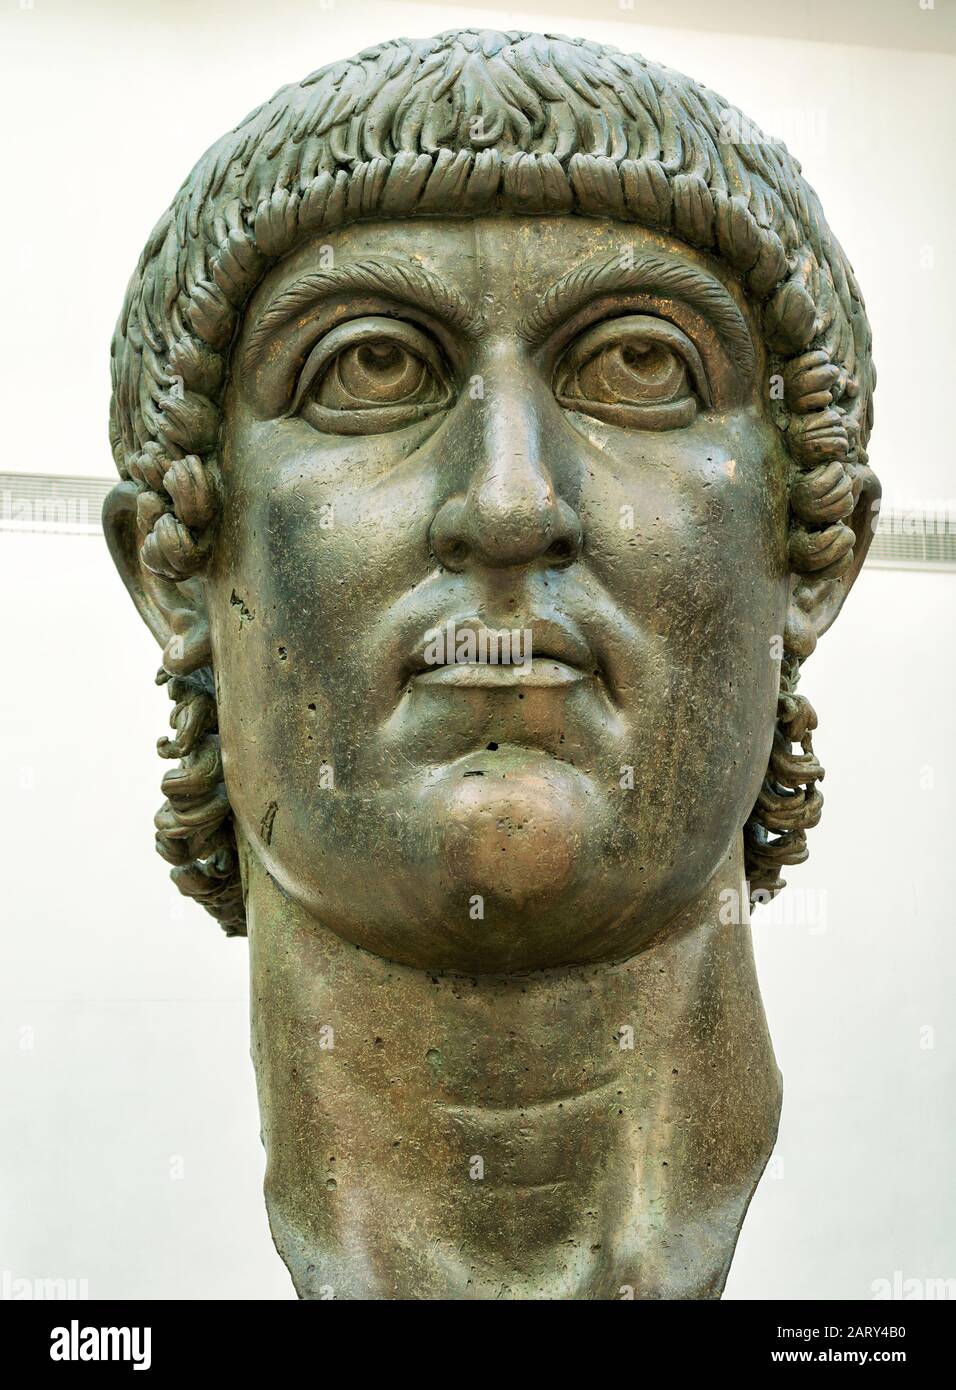 ROME, ITALY - OCTOBER 3, 2012: The head of the bronze statue of Constantine the Great in the Capitoline Museum. Stock Photo